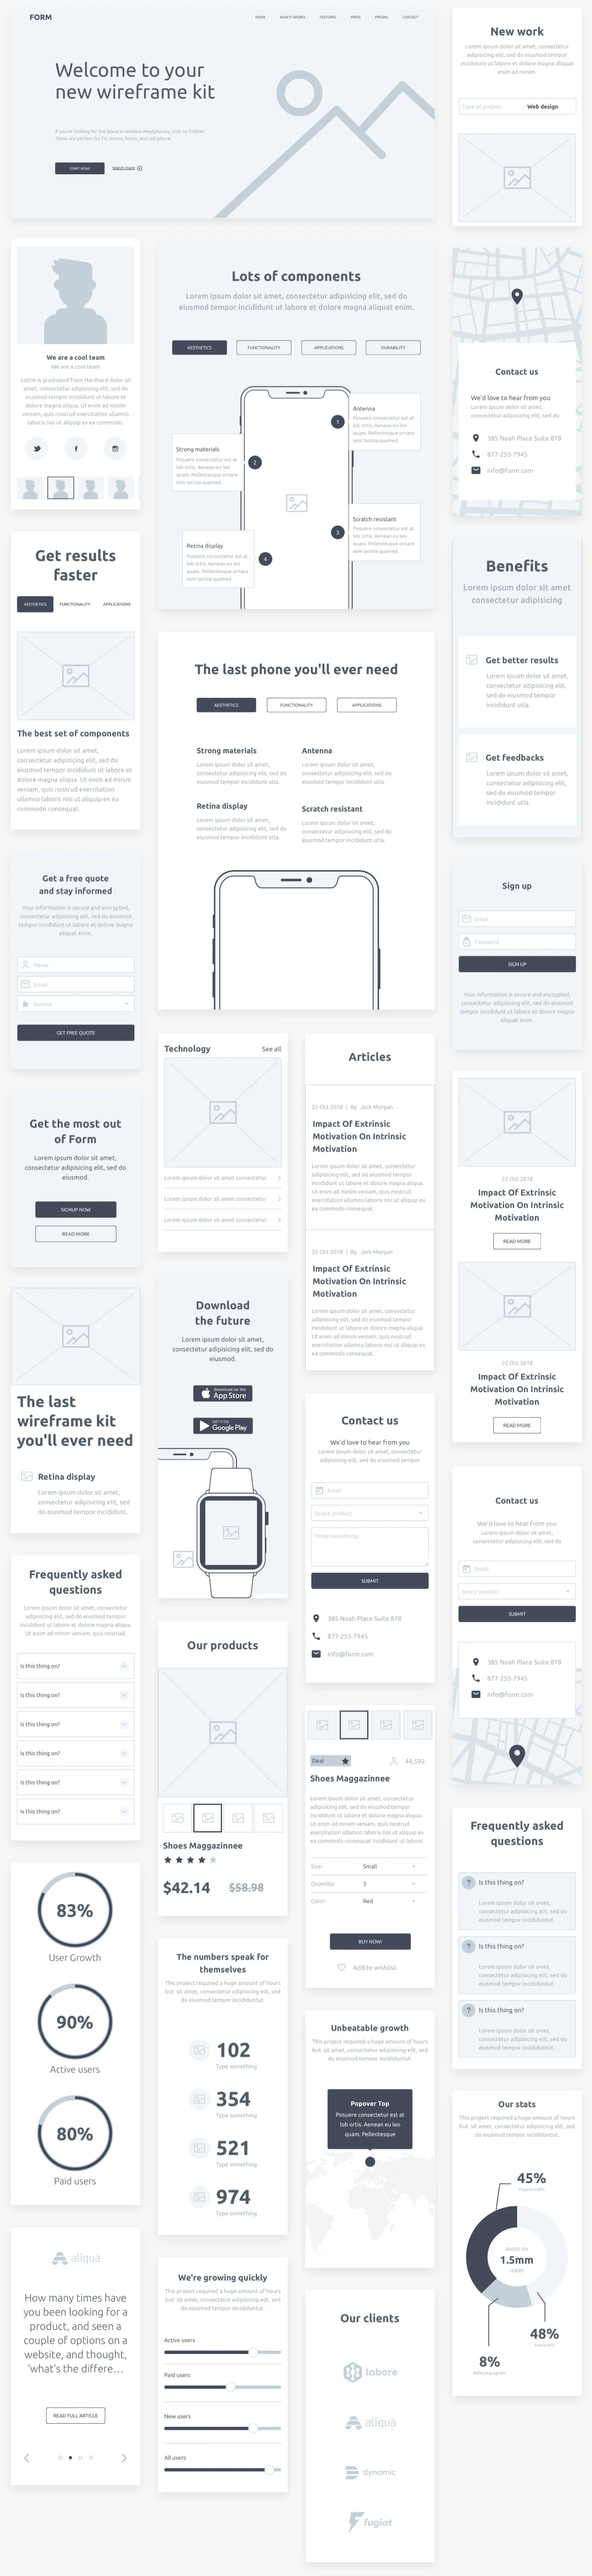 Form - Wireframe kit from InVision